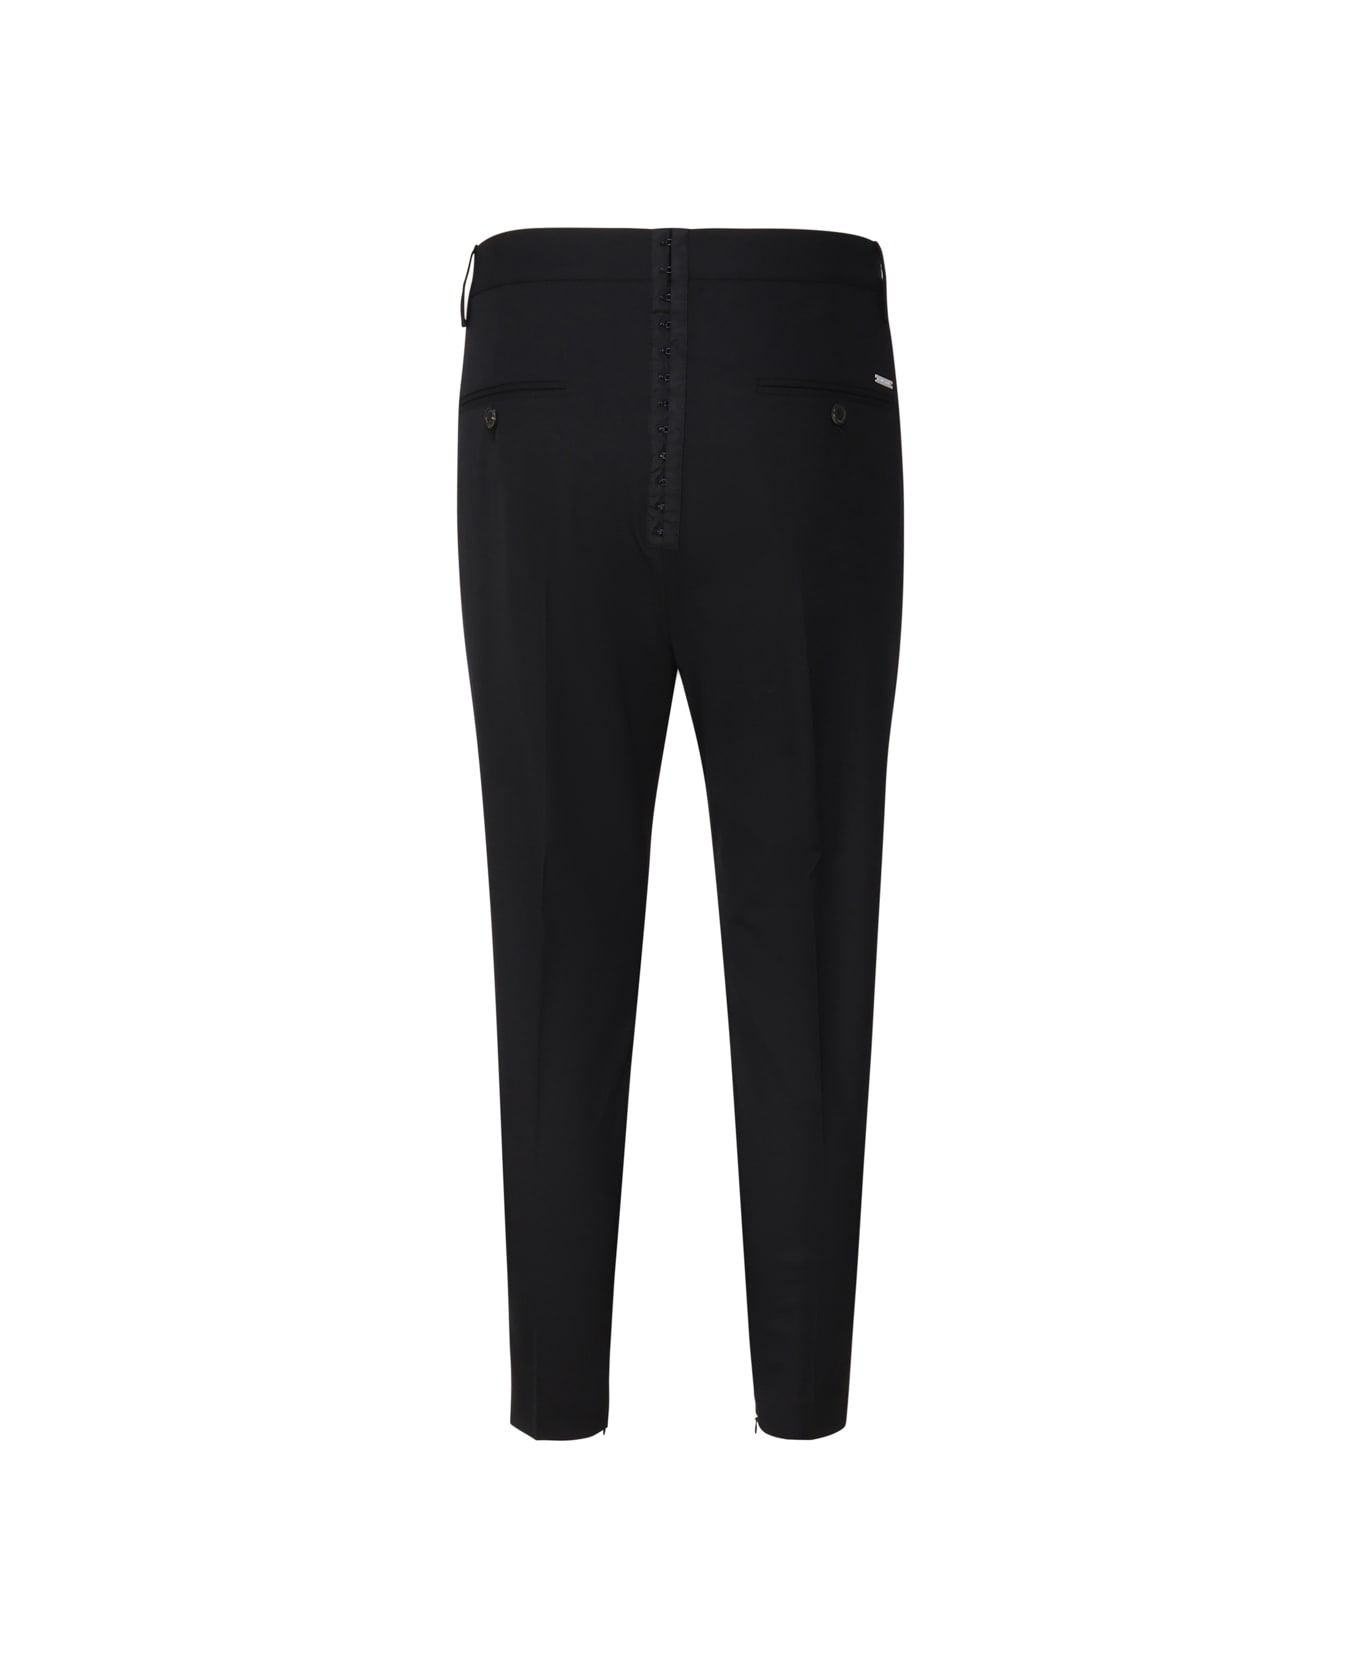 Dsquared2 Stretch Wool Blend Trousers - Black ボトムス